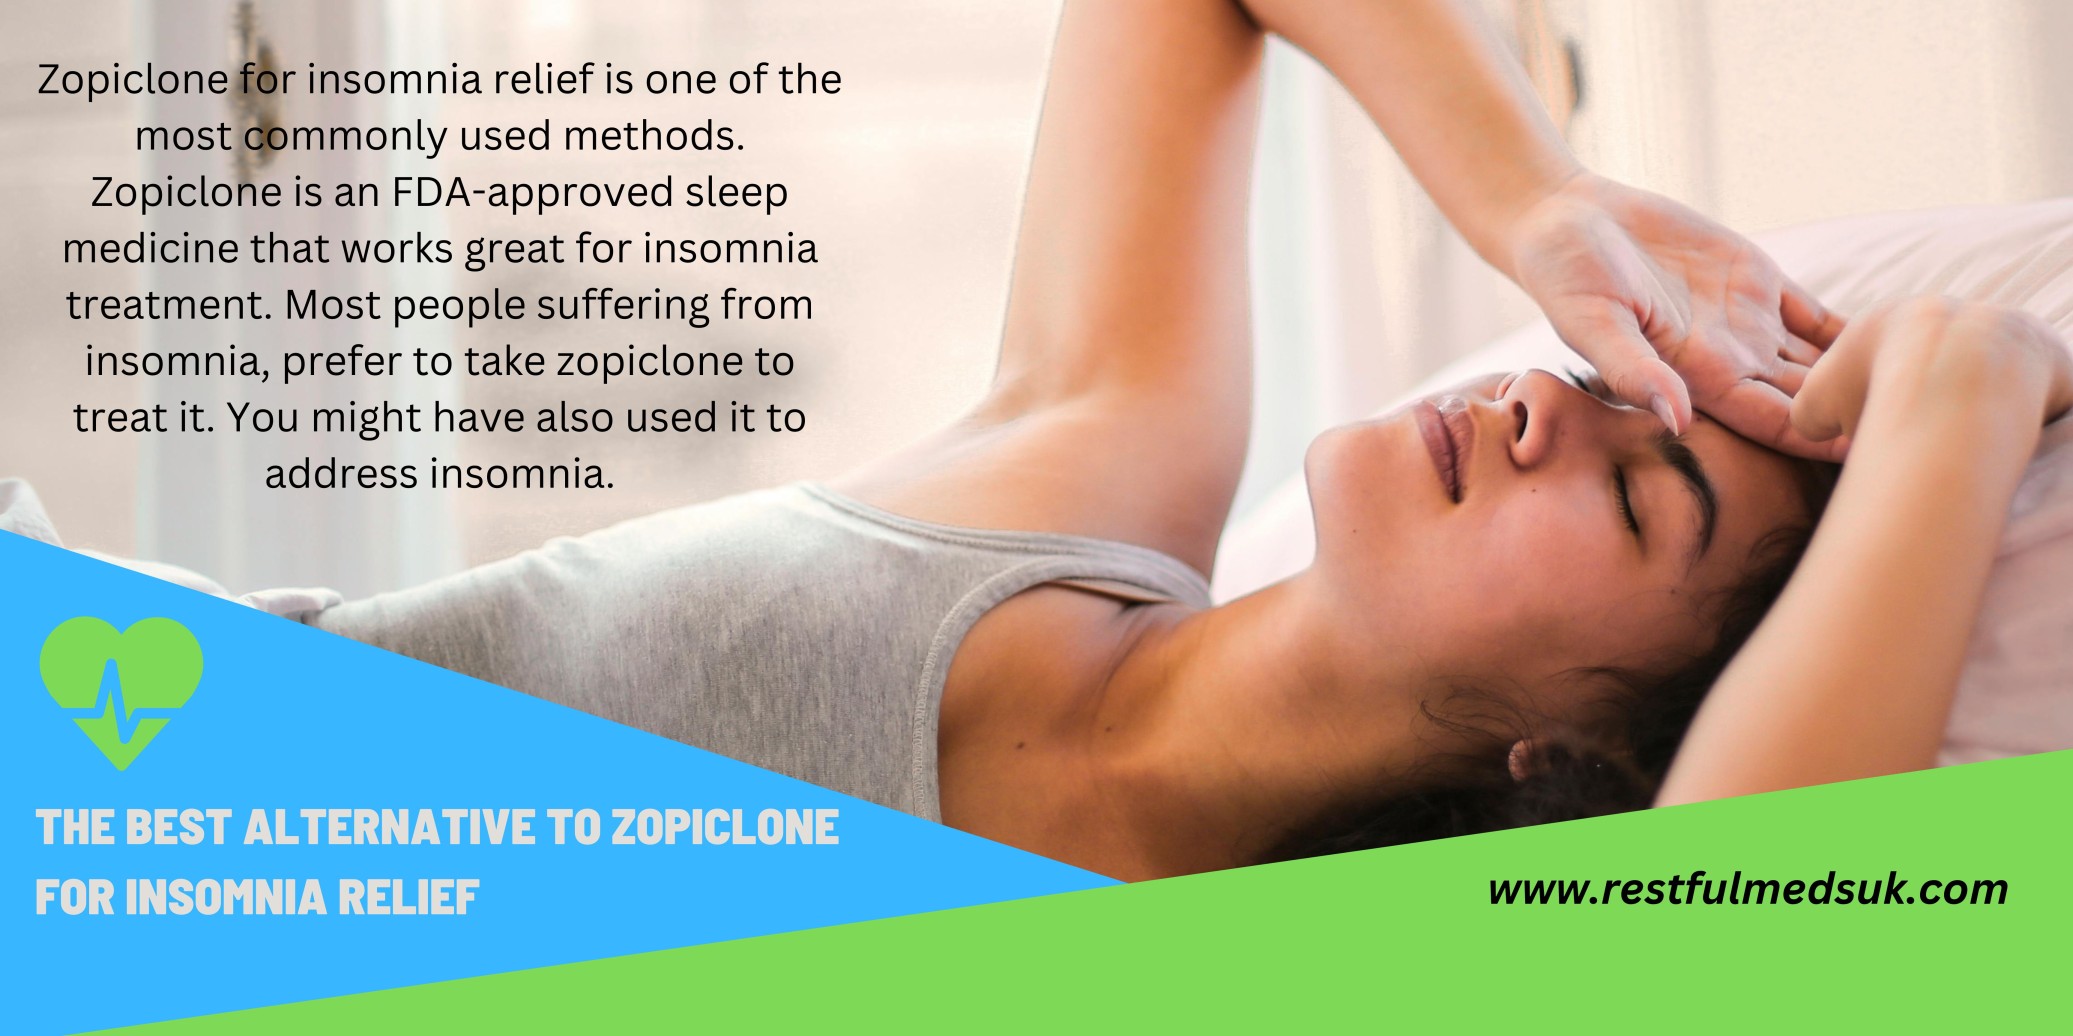 The Best Alternative to Zopiclone for Insomnia Relief